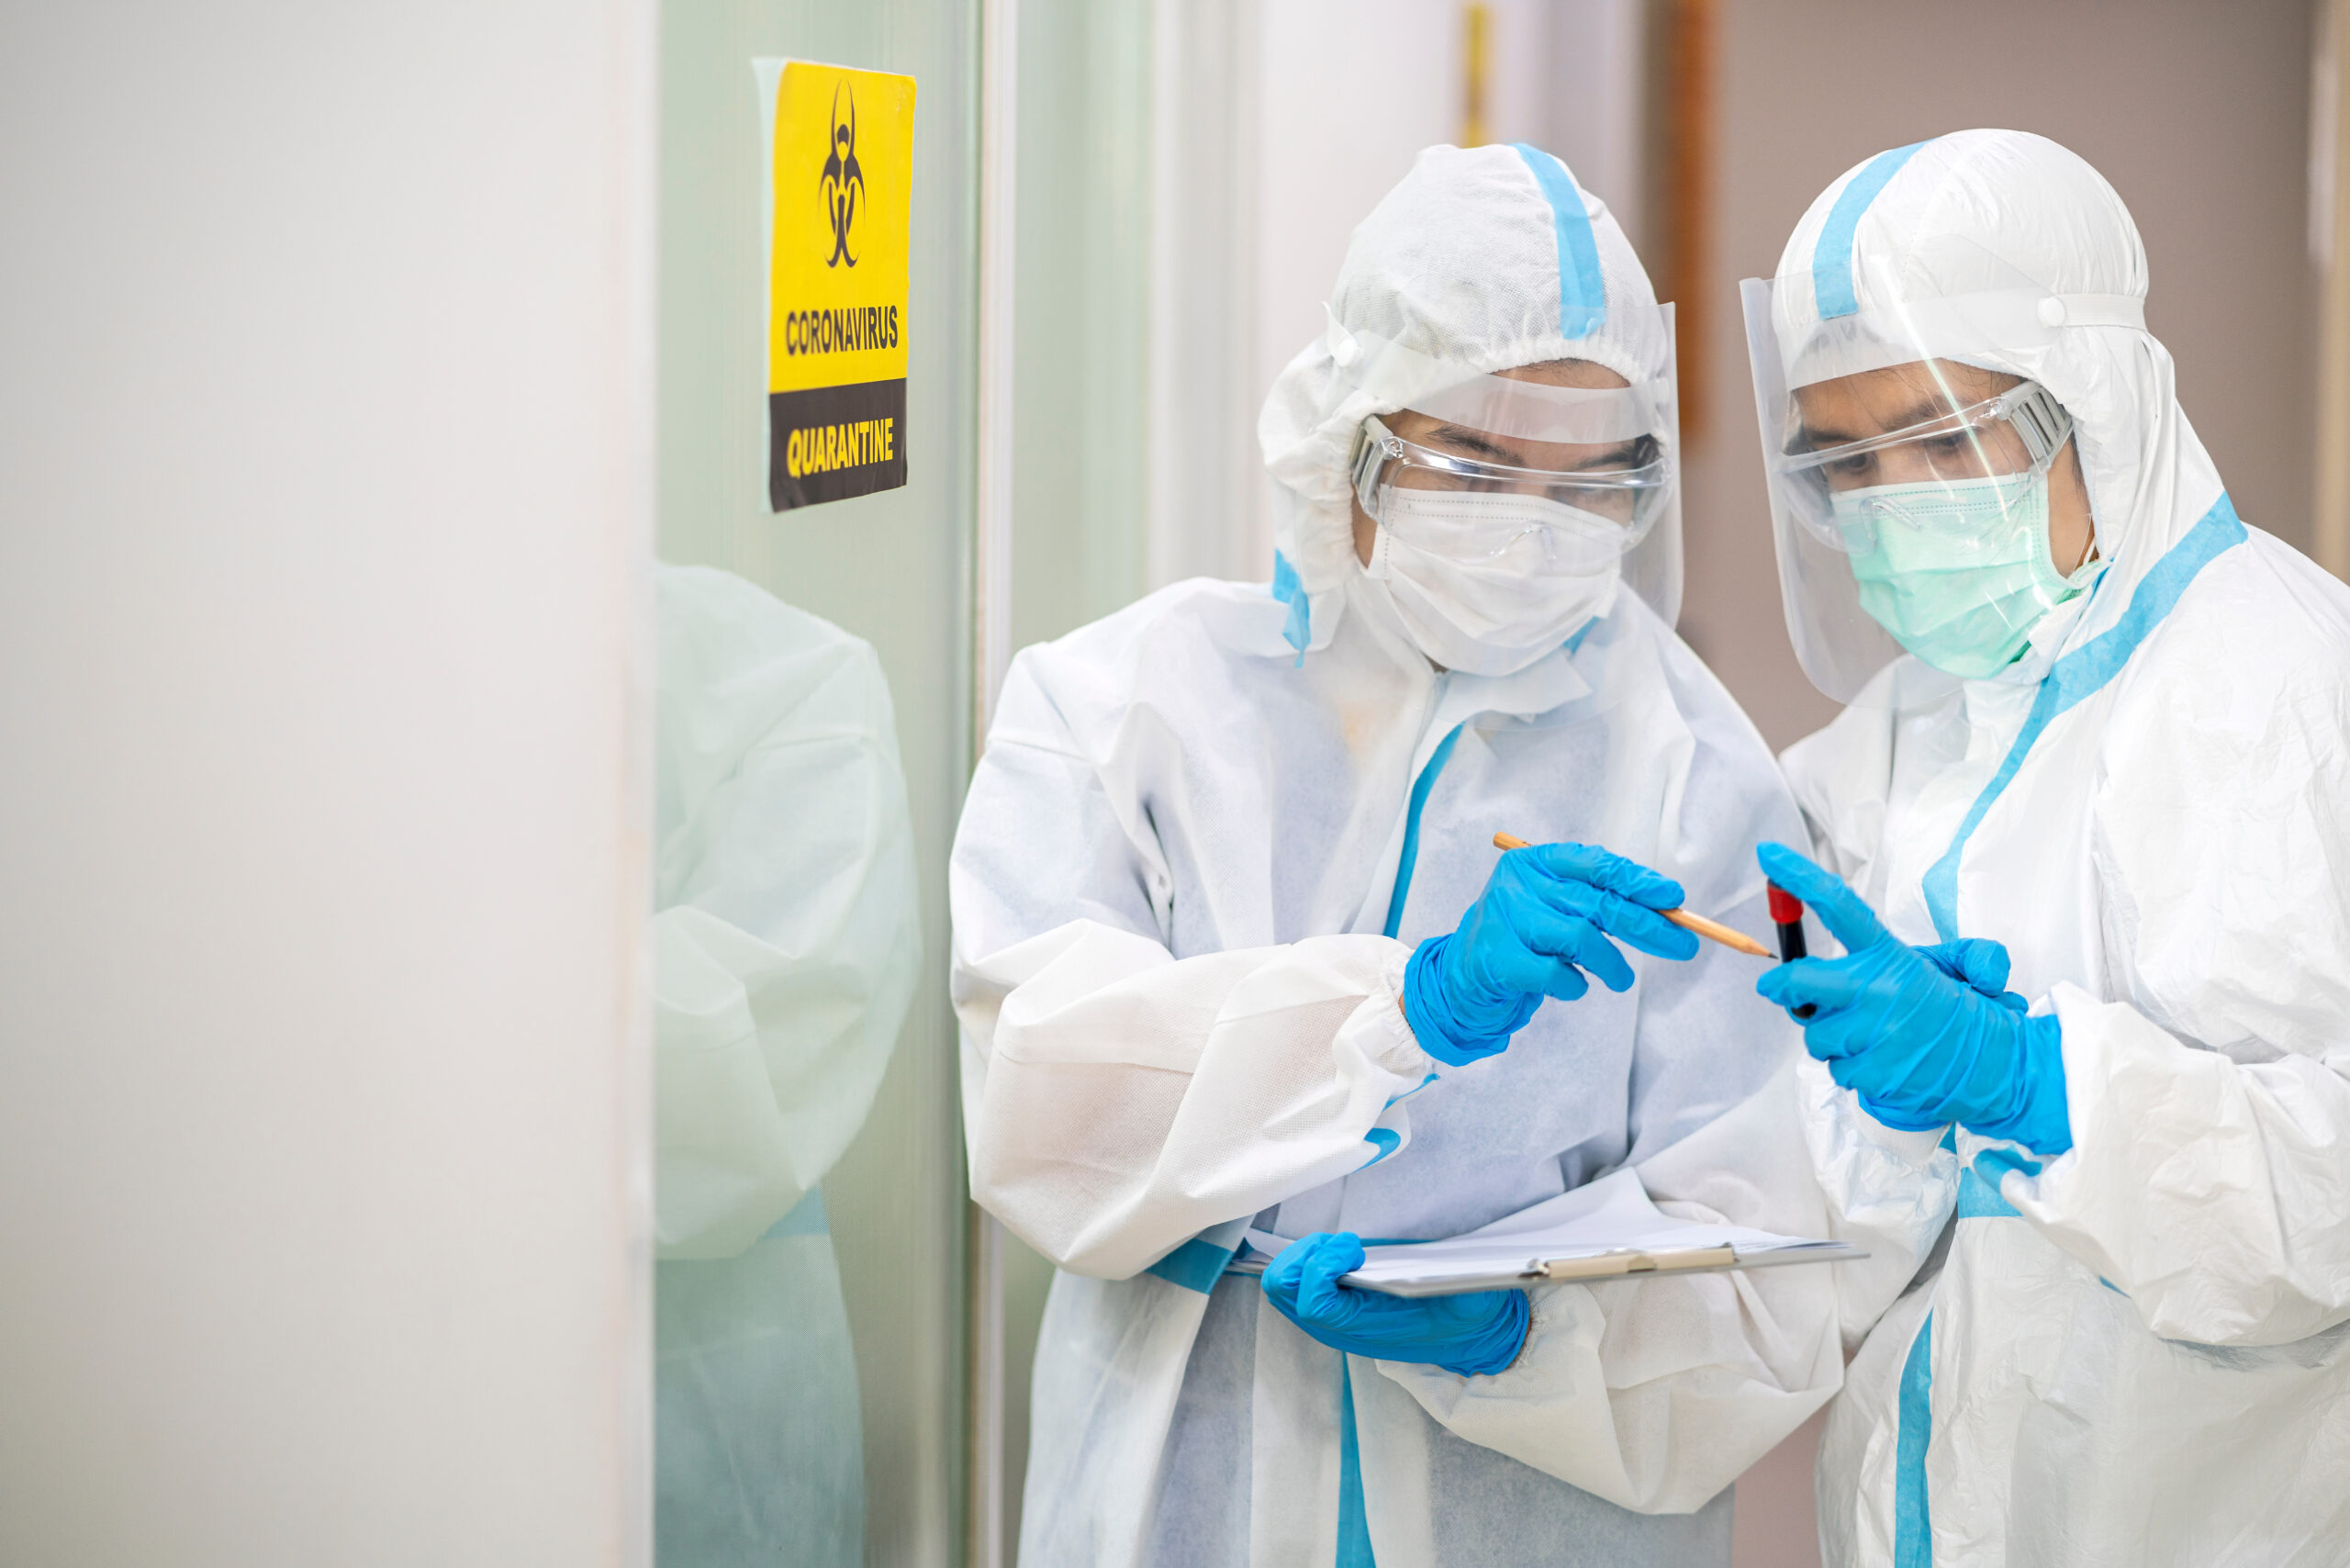 Medical Malpractice Coverage in a PPE World